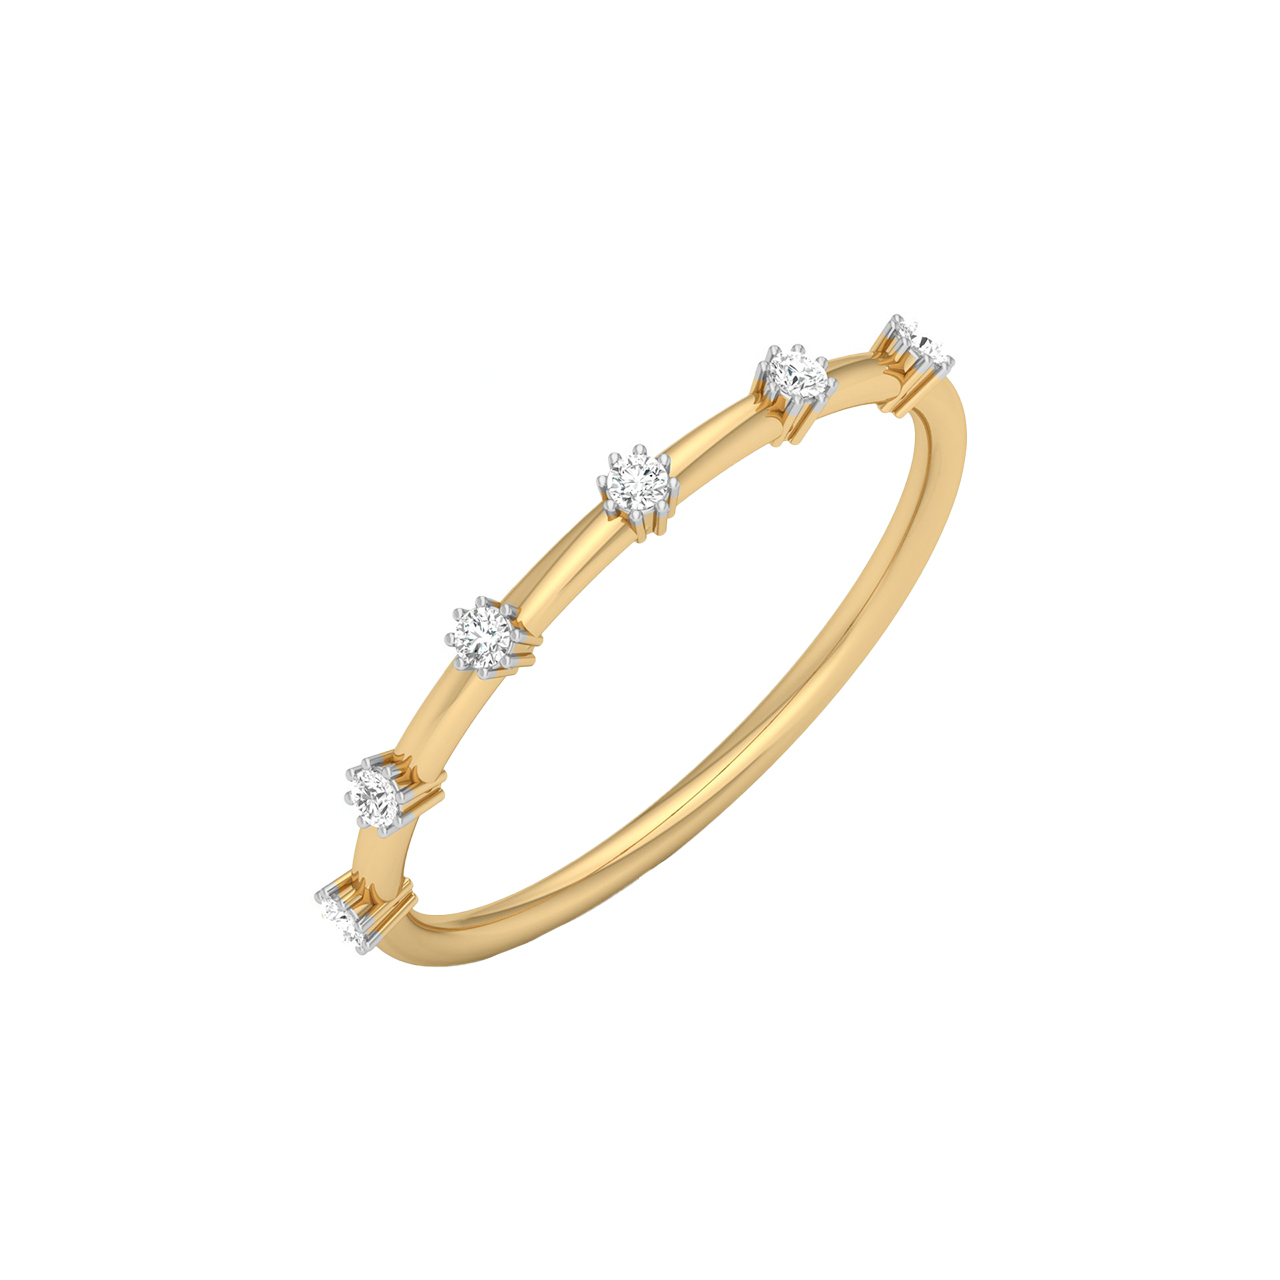 Gold ring | Gold ring designs, Gold rings fashion, Gold rings